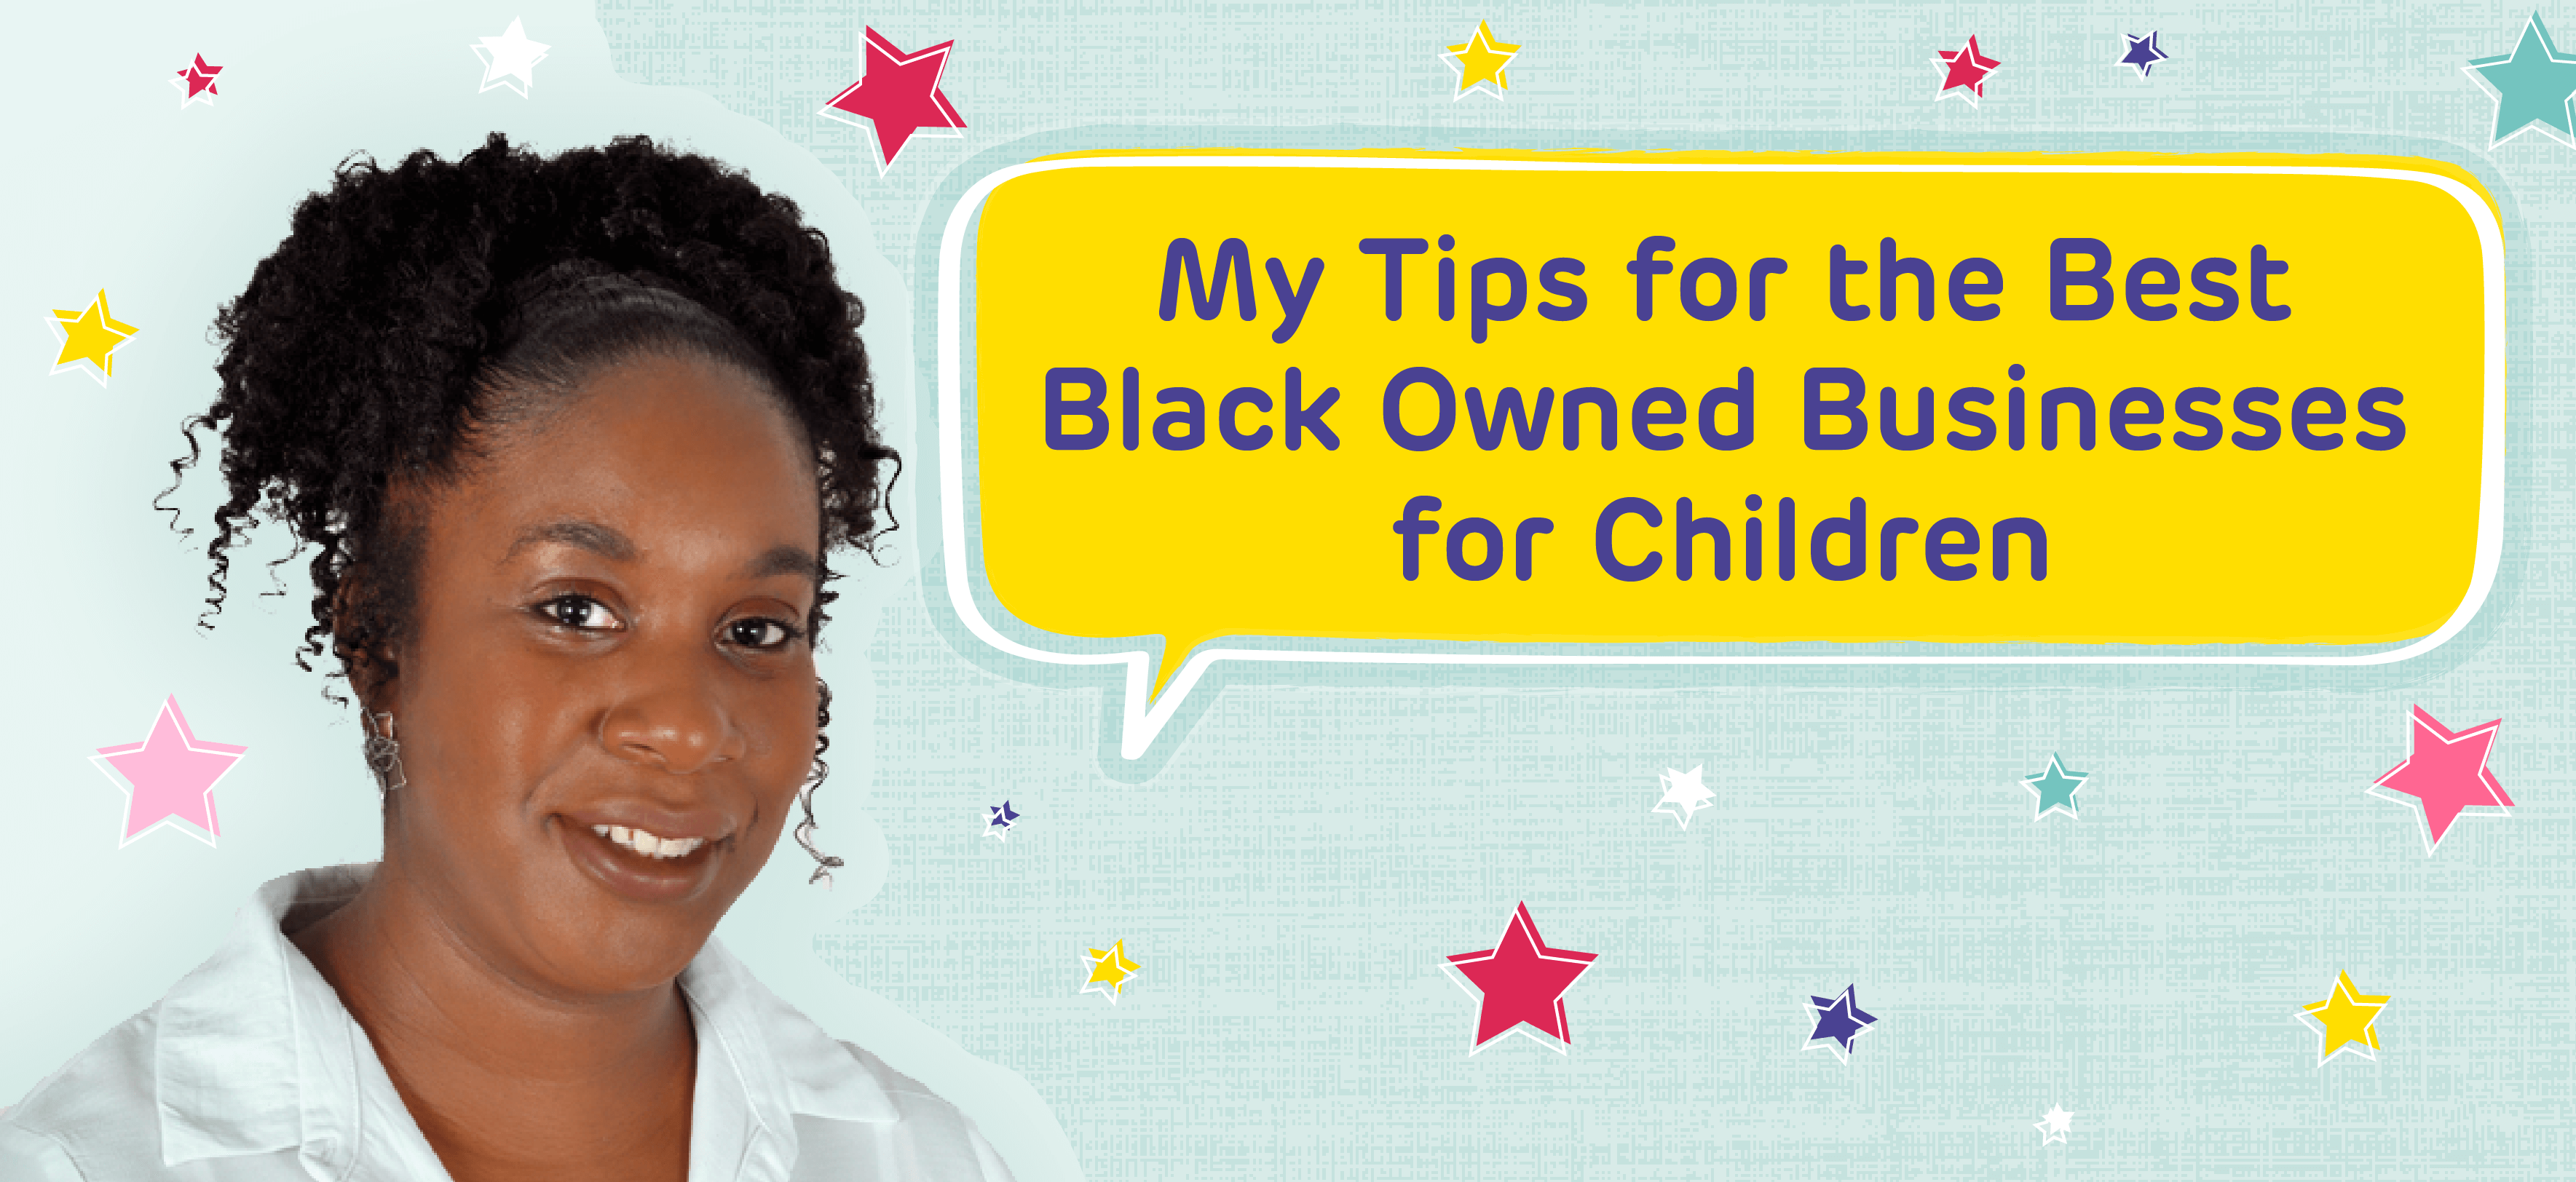 My Tips for the Best Black Owned Businesses for Children